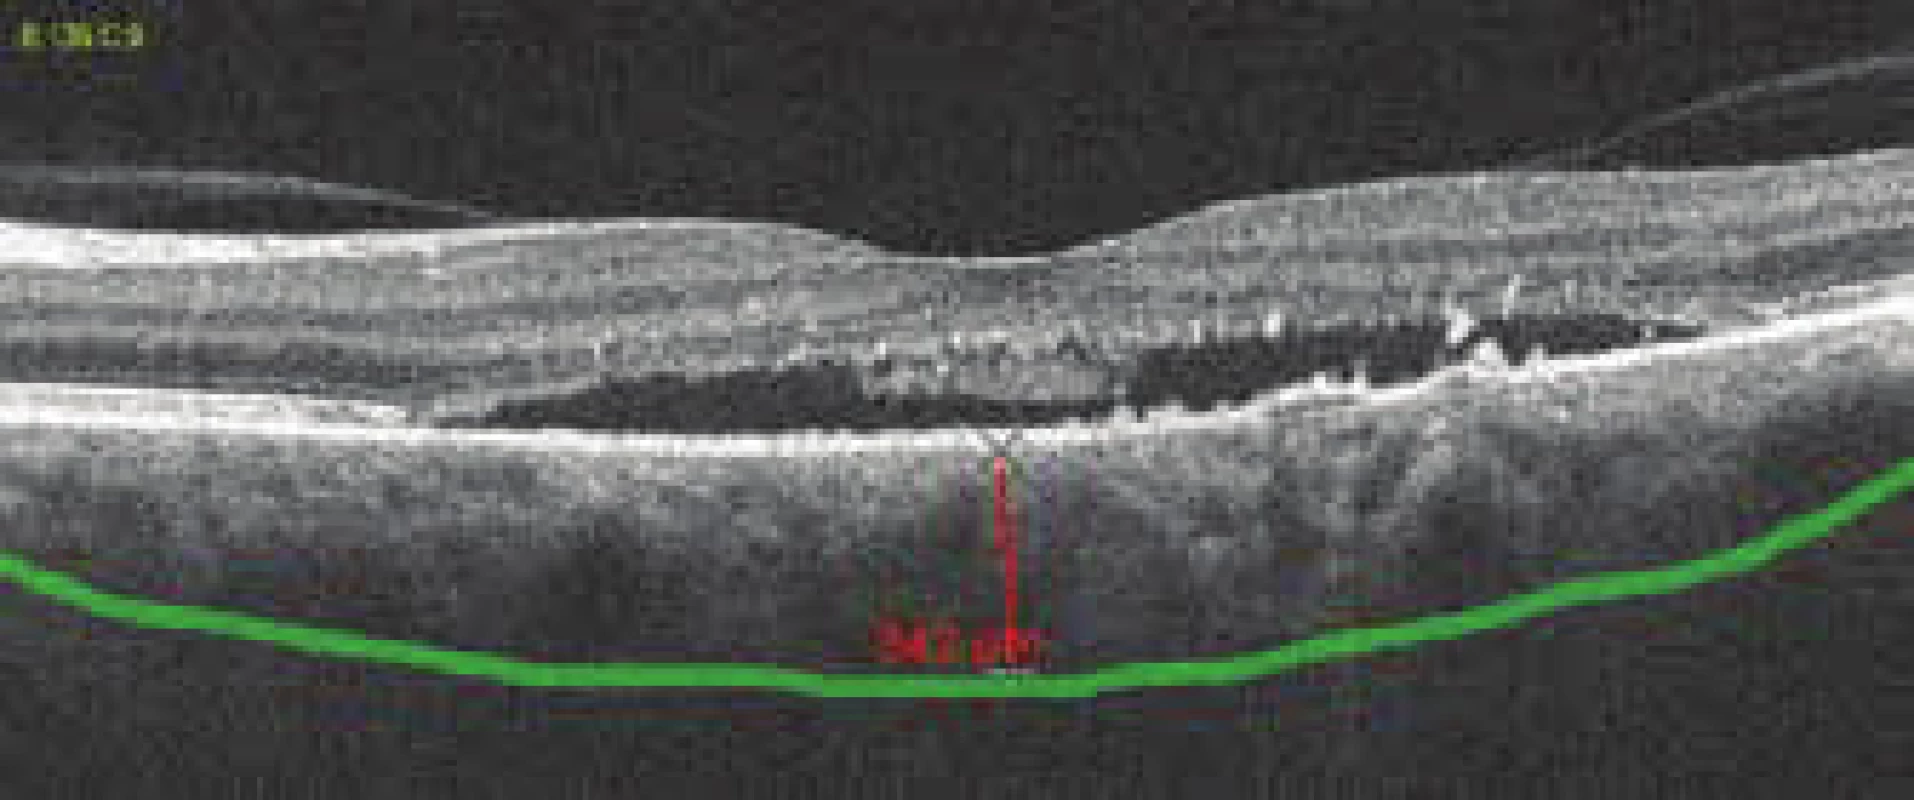 Pachychoroid, thickness of choroidea 342 μm